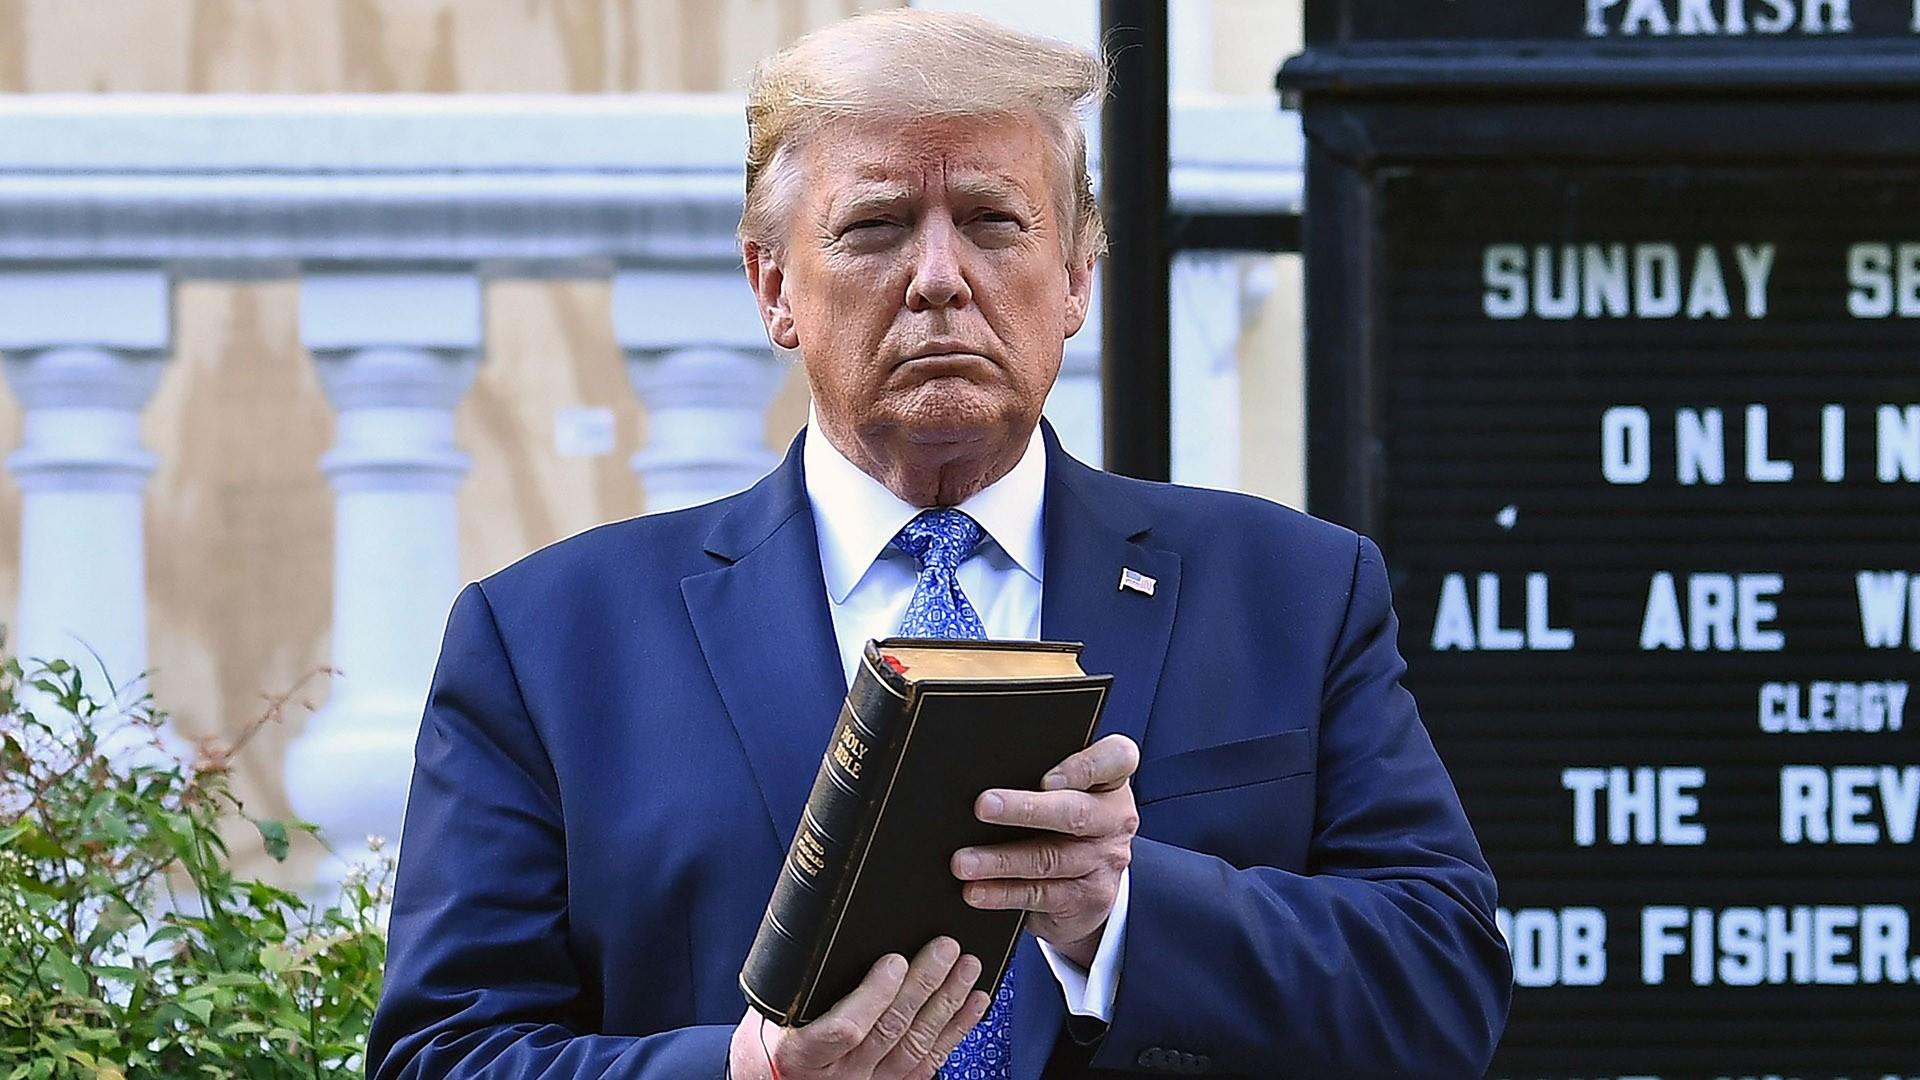 The Bible is not a prop': Religious leaders, lawmakers outraged over Trump  church visit